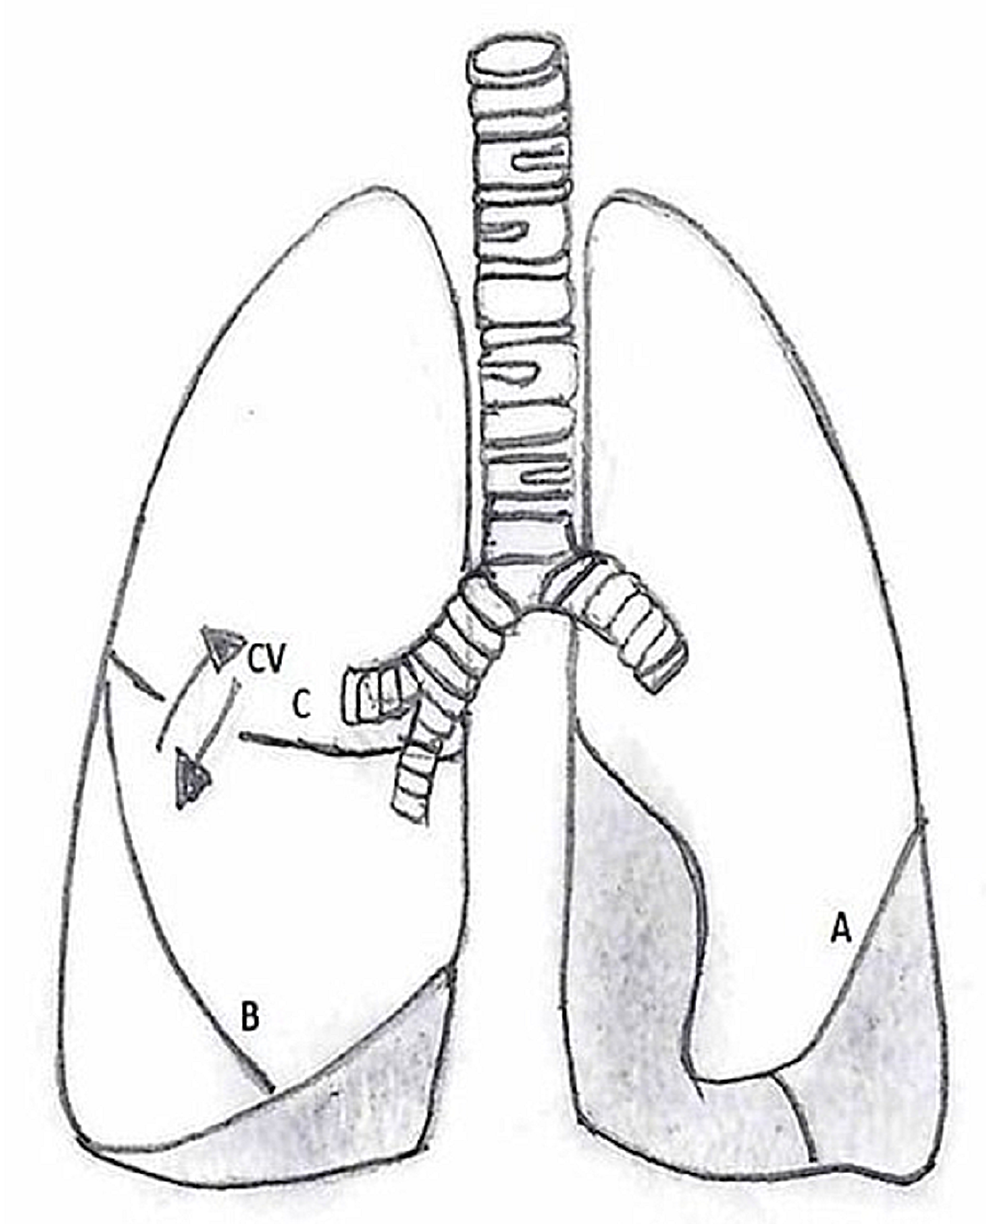 Line-diagram-showing-fissures-of-the-lungs-with-collateral-ventilation-in-the-right-lung:-(A)-Left-oblique-fissure,-(B)-right-oblique-fissure,-and-(C)-right-horizontal-fissure